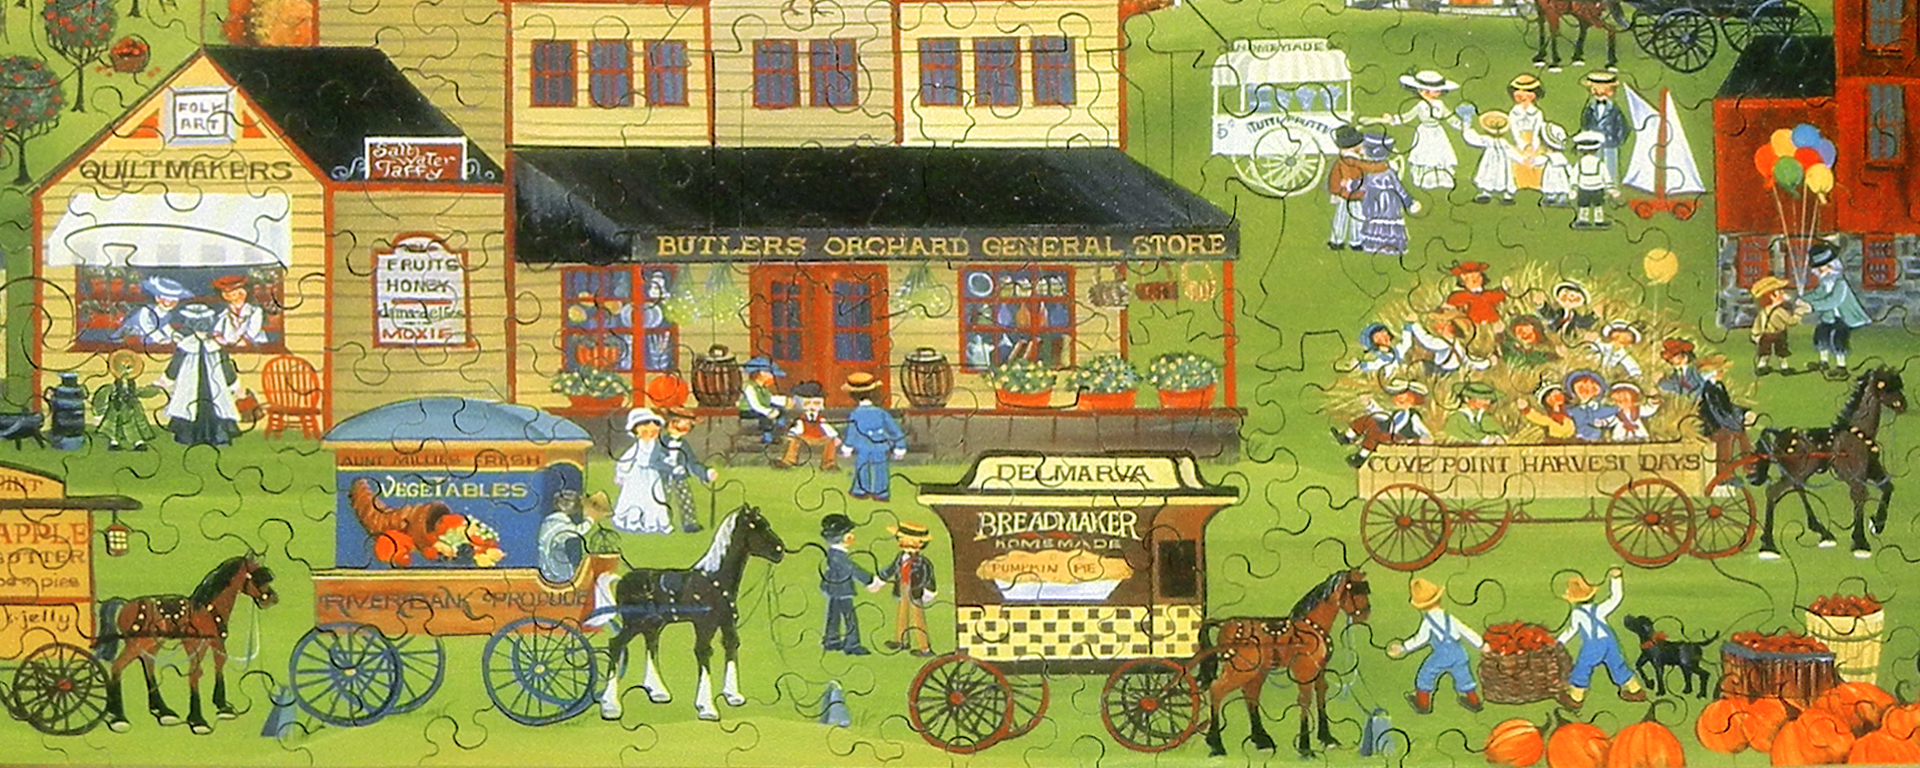 Wooden carriage puzzle depicting a Harvest Day in the past with horse drawn carriages displaying different foods in front of the general store.